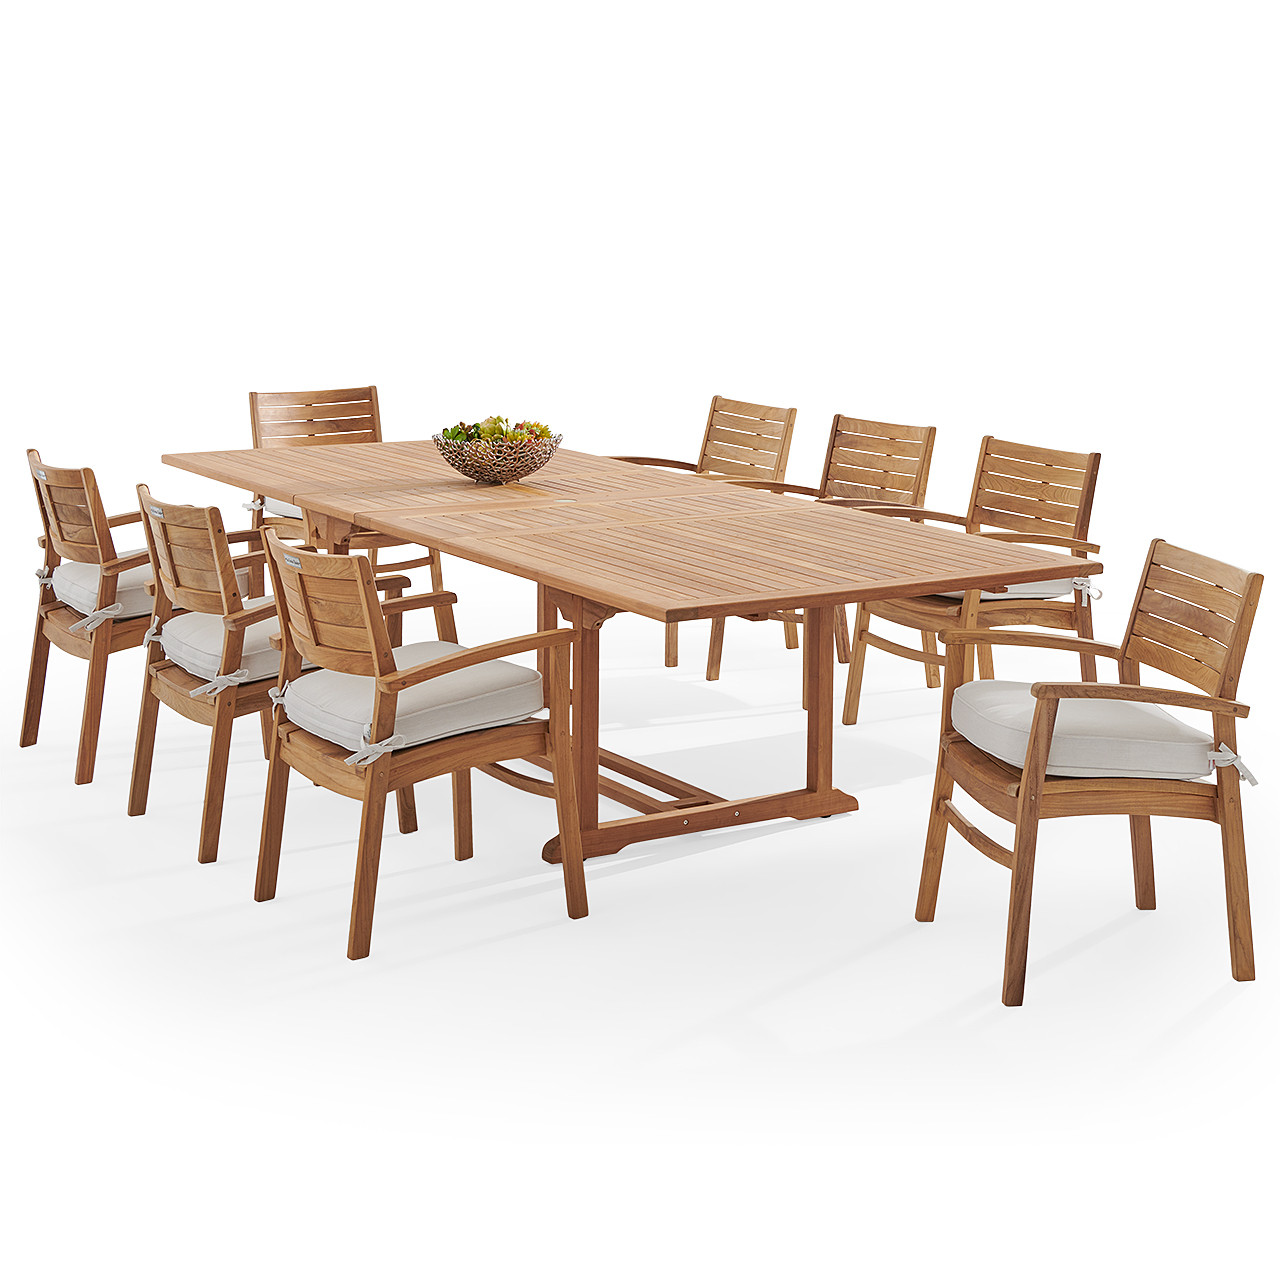 Warwick Teak with Cushions 9 Piece Dining Set + Bristol 87-118 x 47 in. Table